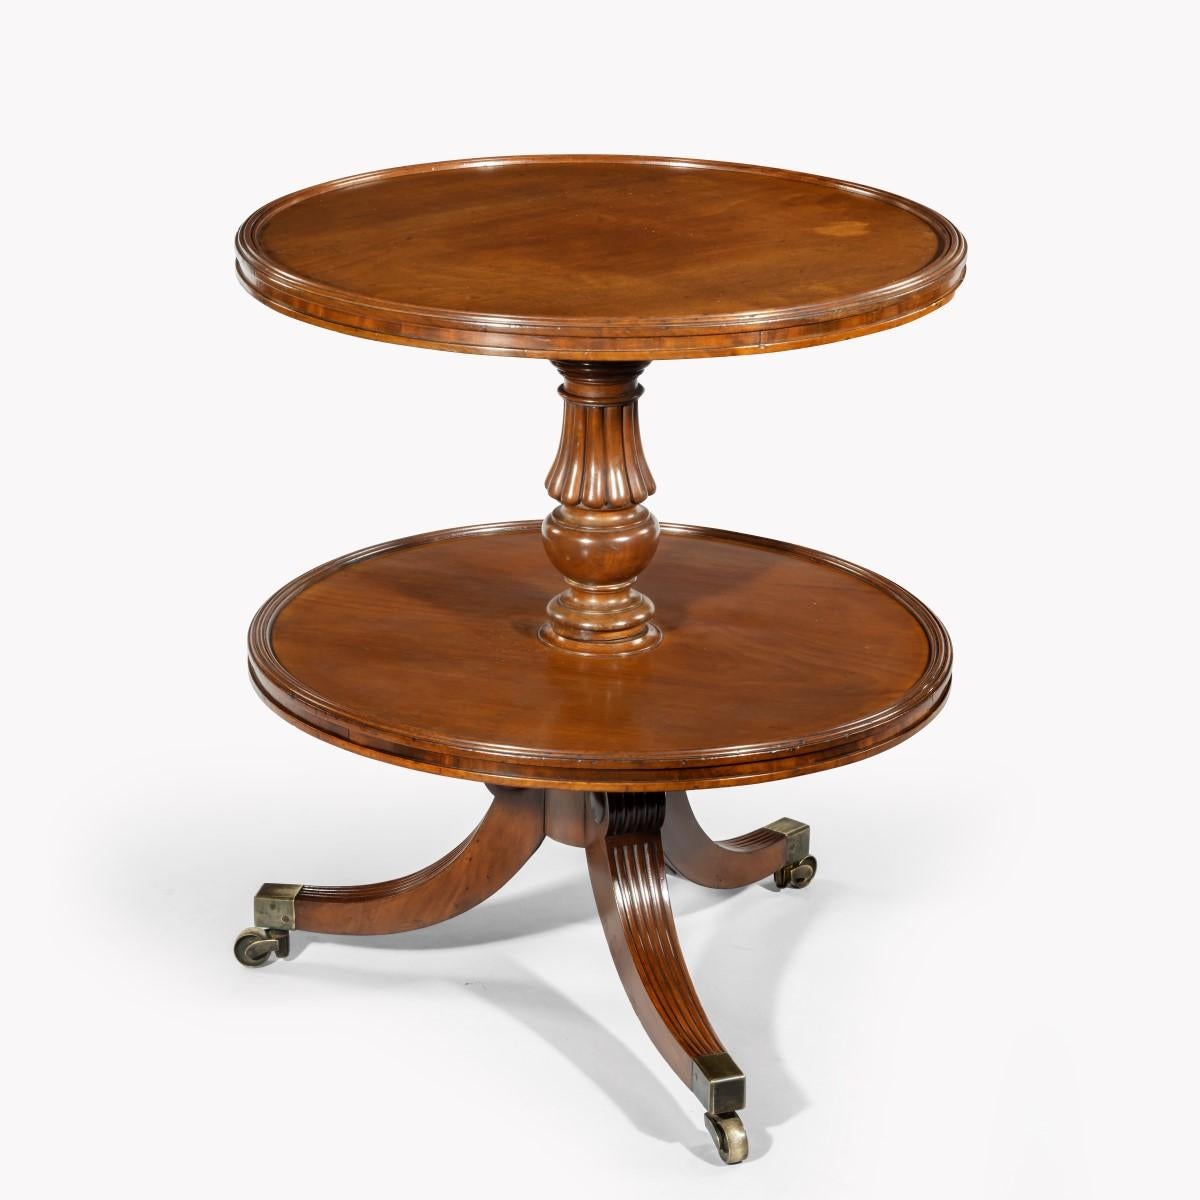 A William IV two tier mahogany table attribruted to Gillows, with two circular shelves, the top one with a dished edge, supported on a reeded and turned baluster column with two flanges, all on three splayed reeded legs with brass caps and castors.